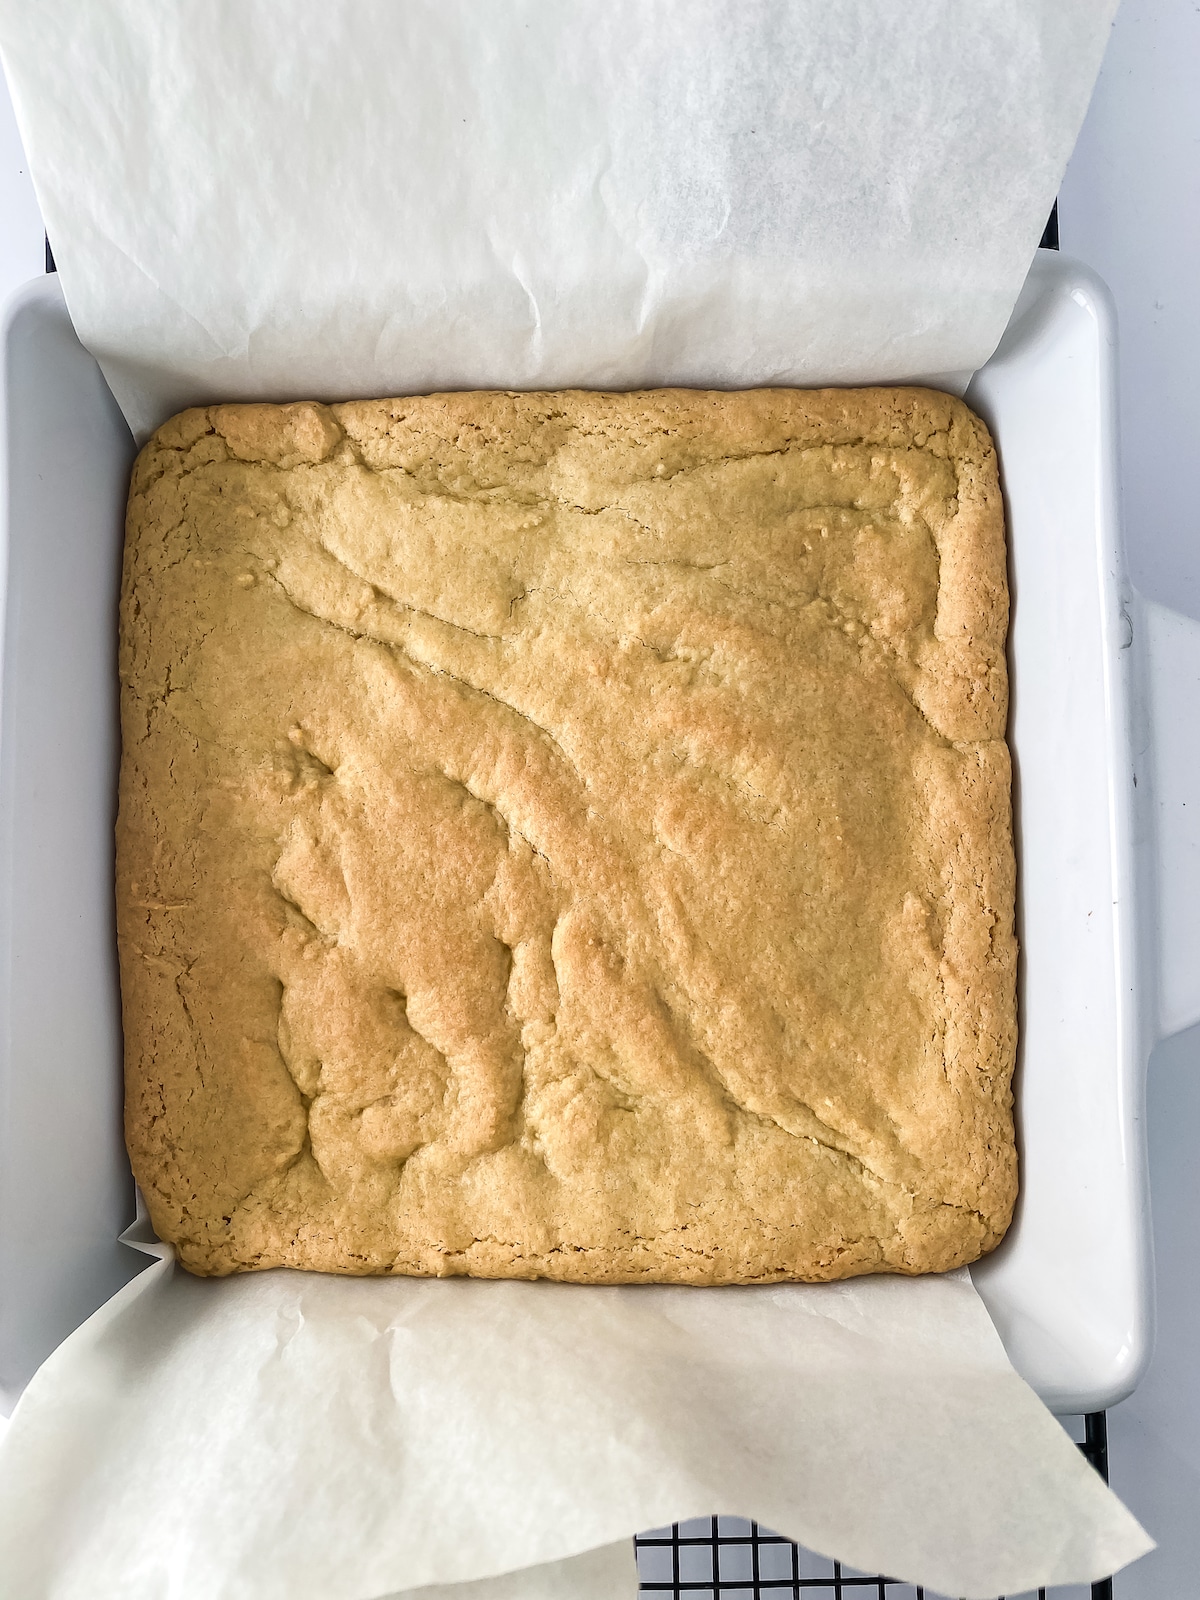 Square white pan with baked cookie on parchment paper